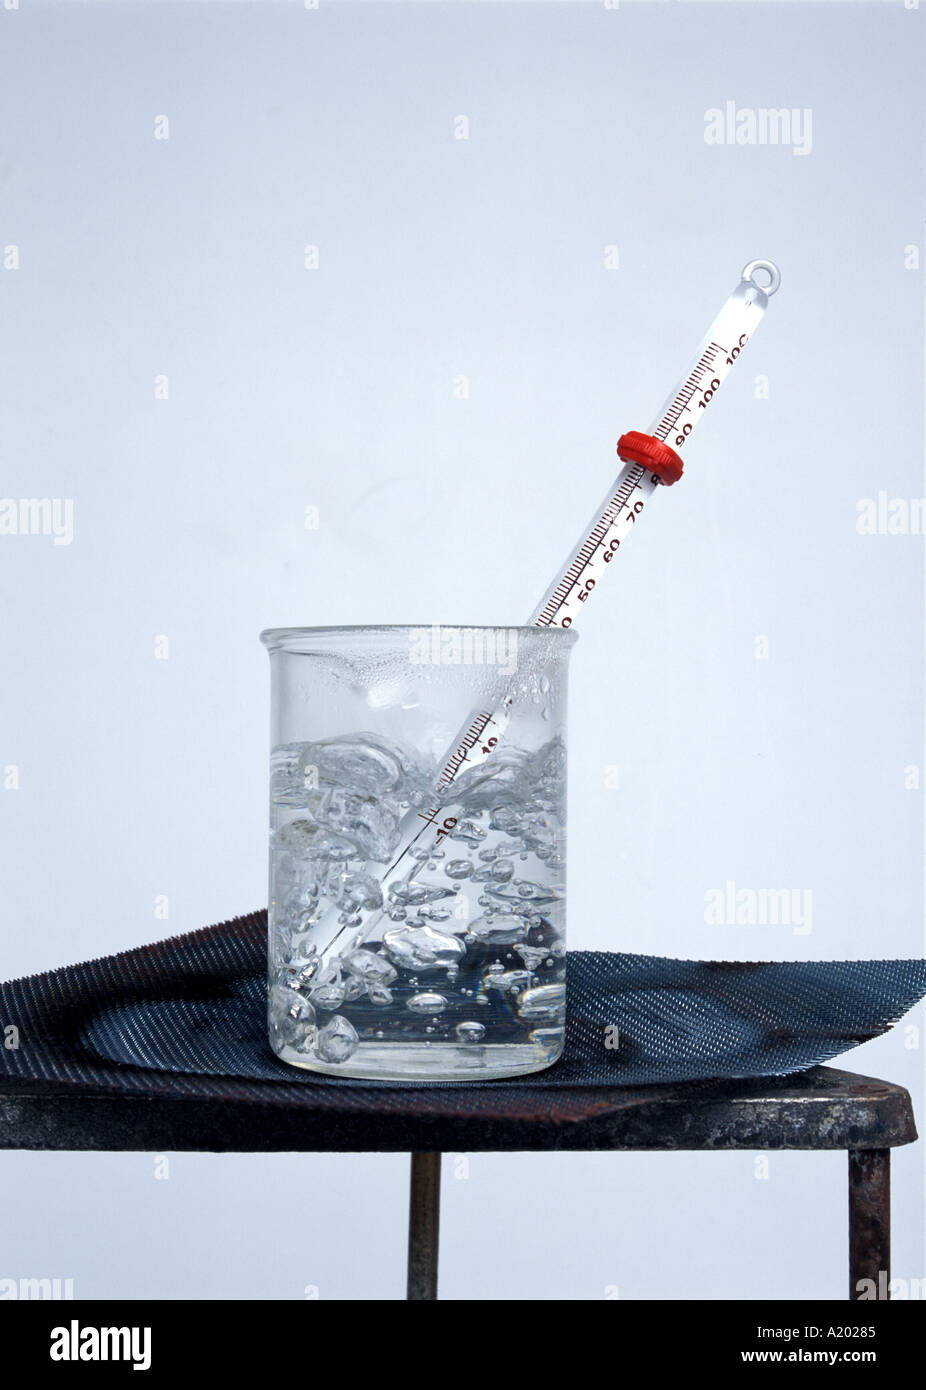 https://c8.alamy.com/comp/A20285/glass-laboratory-beaker-on-bunsen-tripod-with-thermometer-showing-A20285.jpg